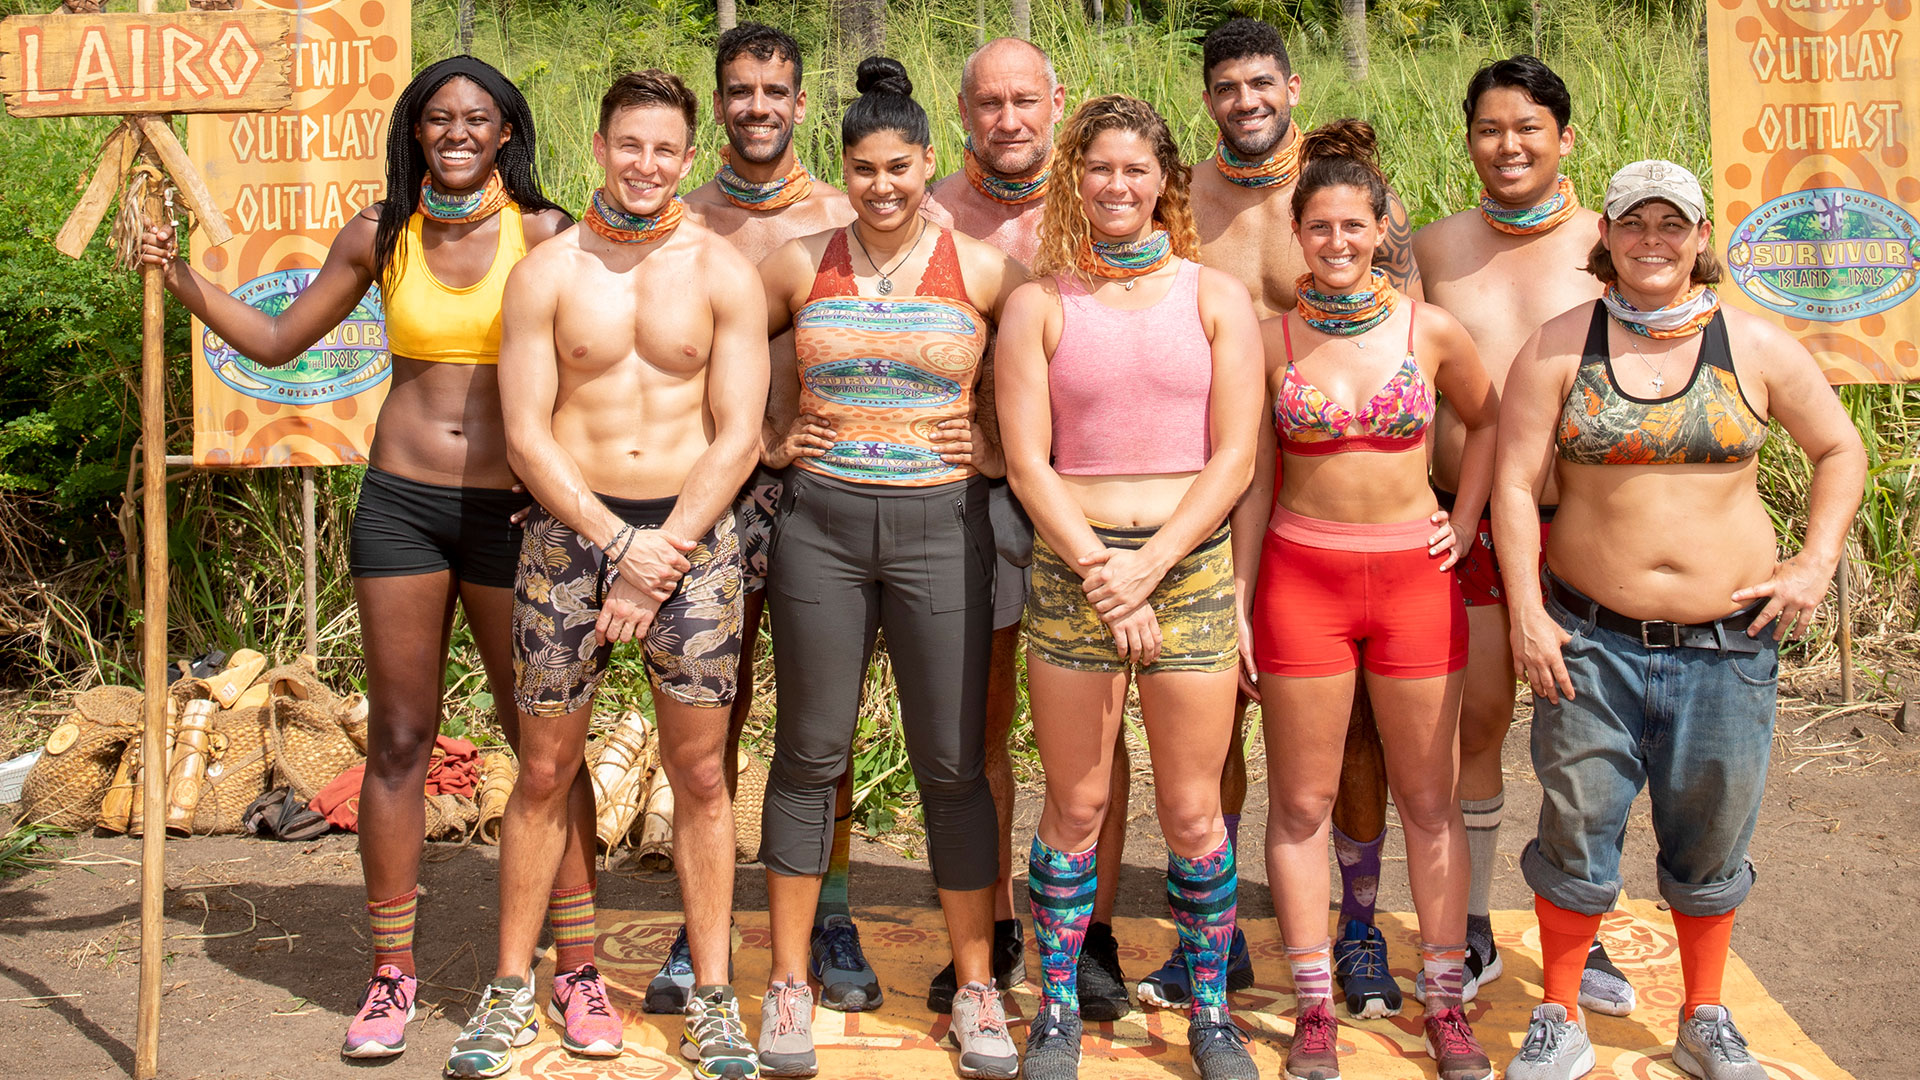 Meet the new castaways during the season premiere on Wednesday, Sept. 